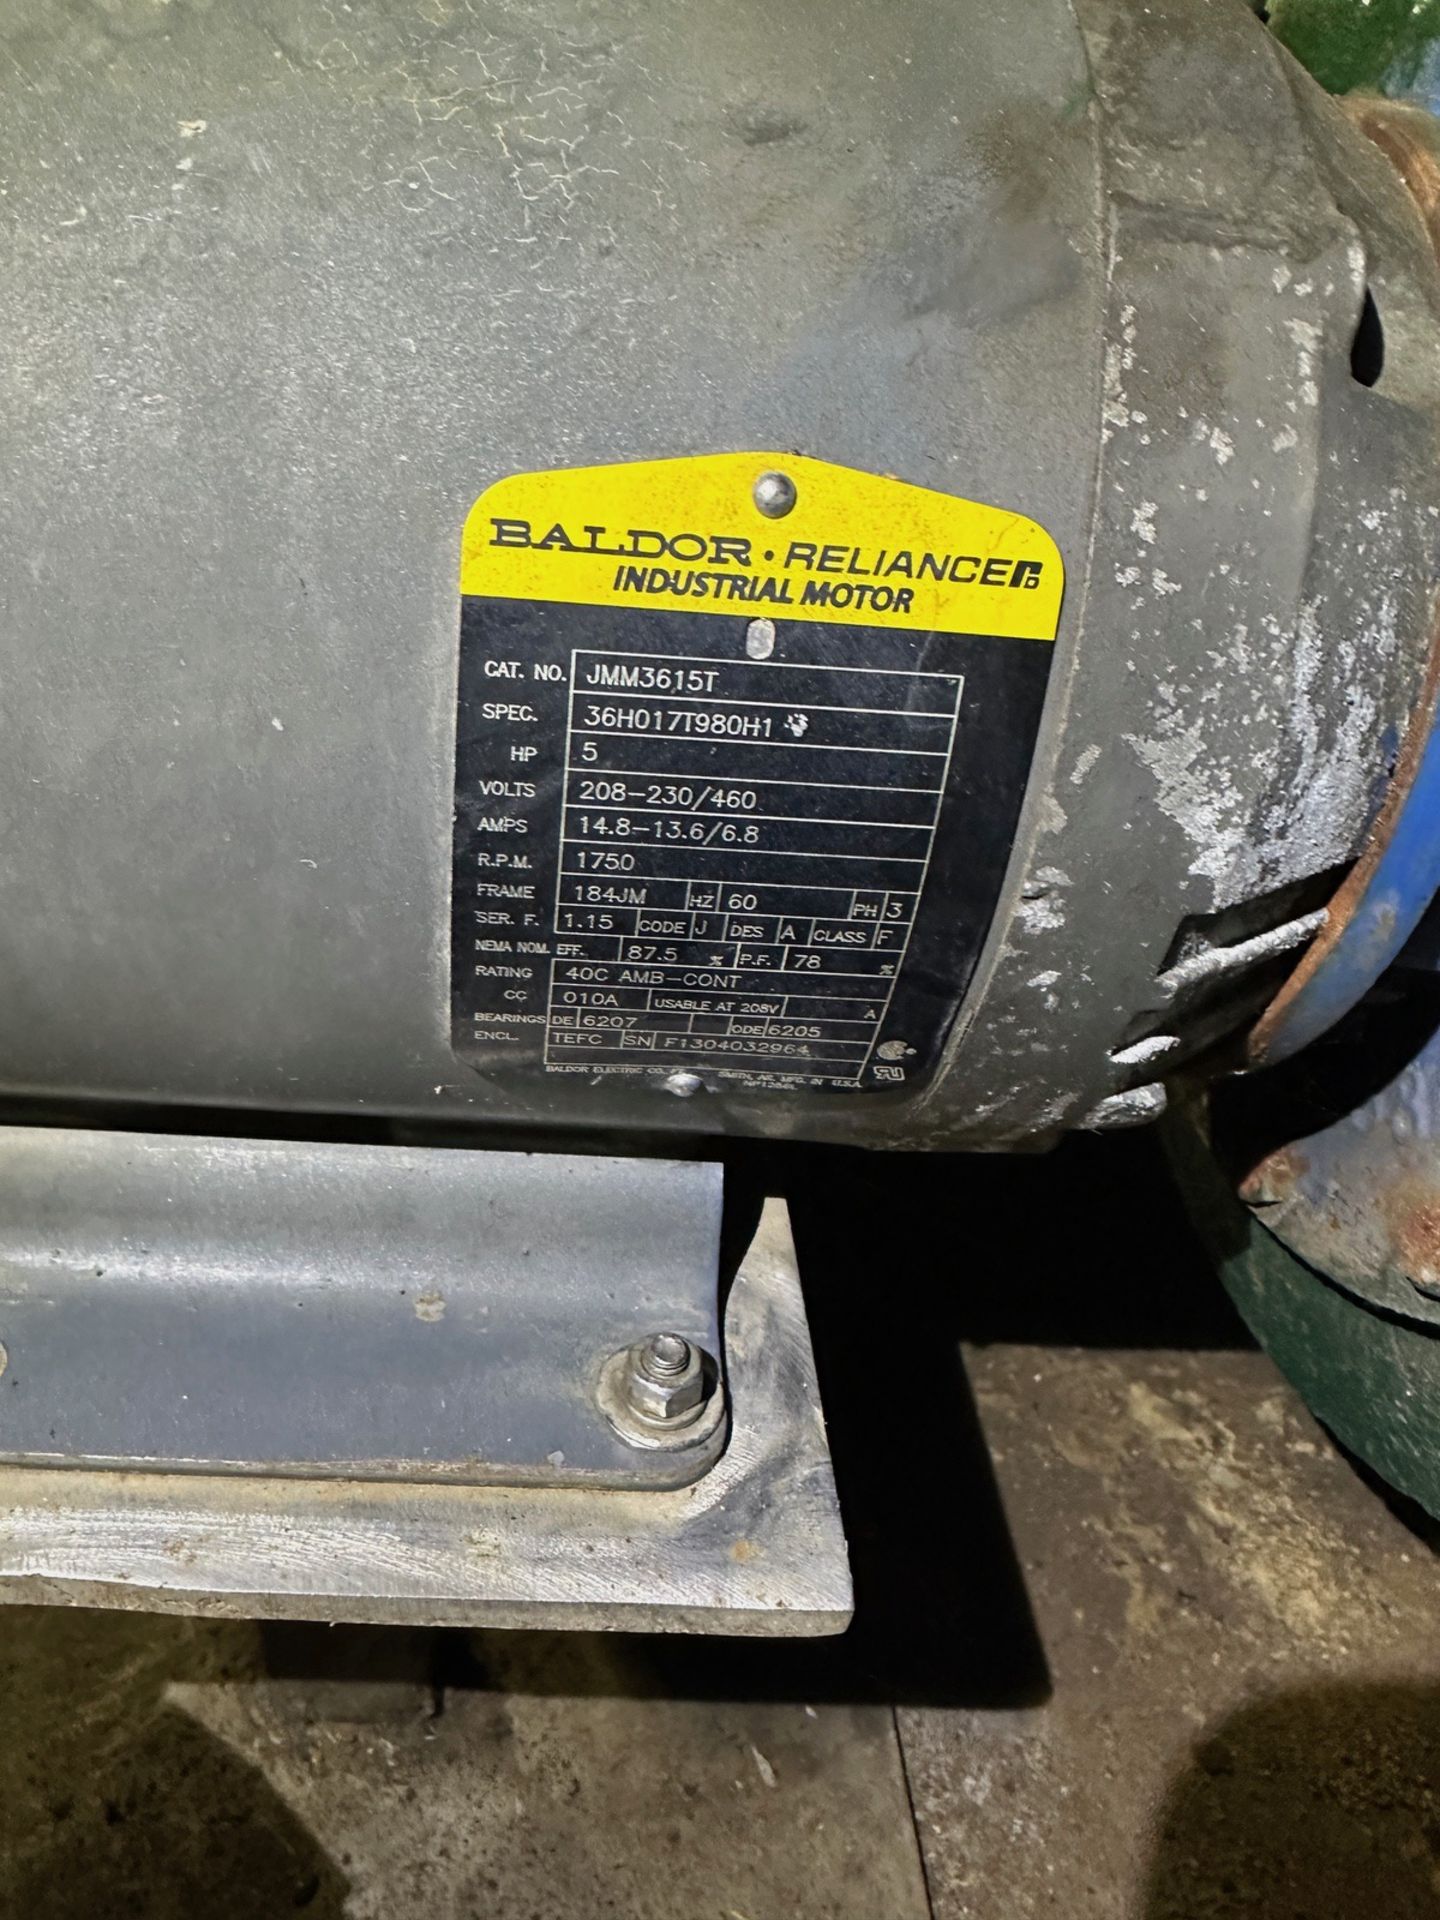 Baldor Reliance 5 HP Industrial Motor with Krum Centrifugal Pump | Rig Fee $75 - Image 2 of 3